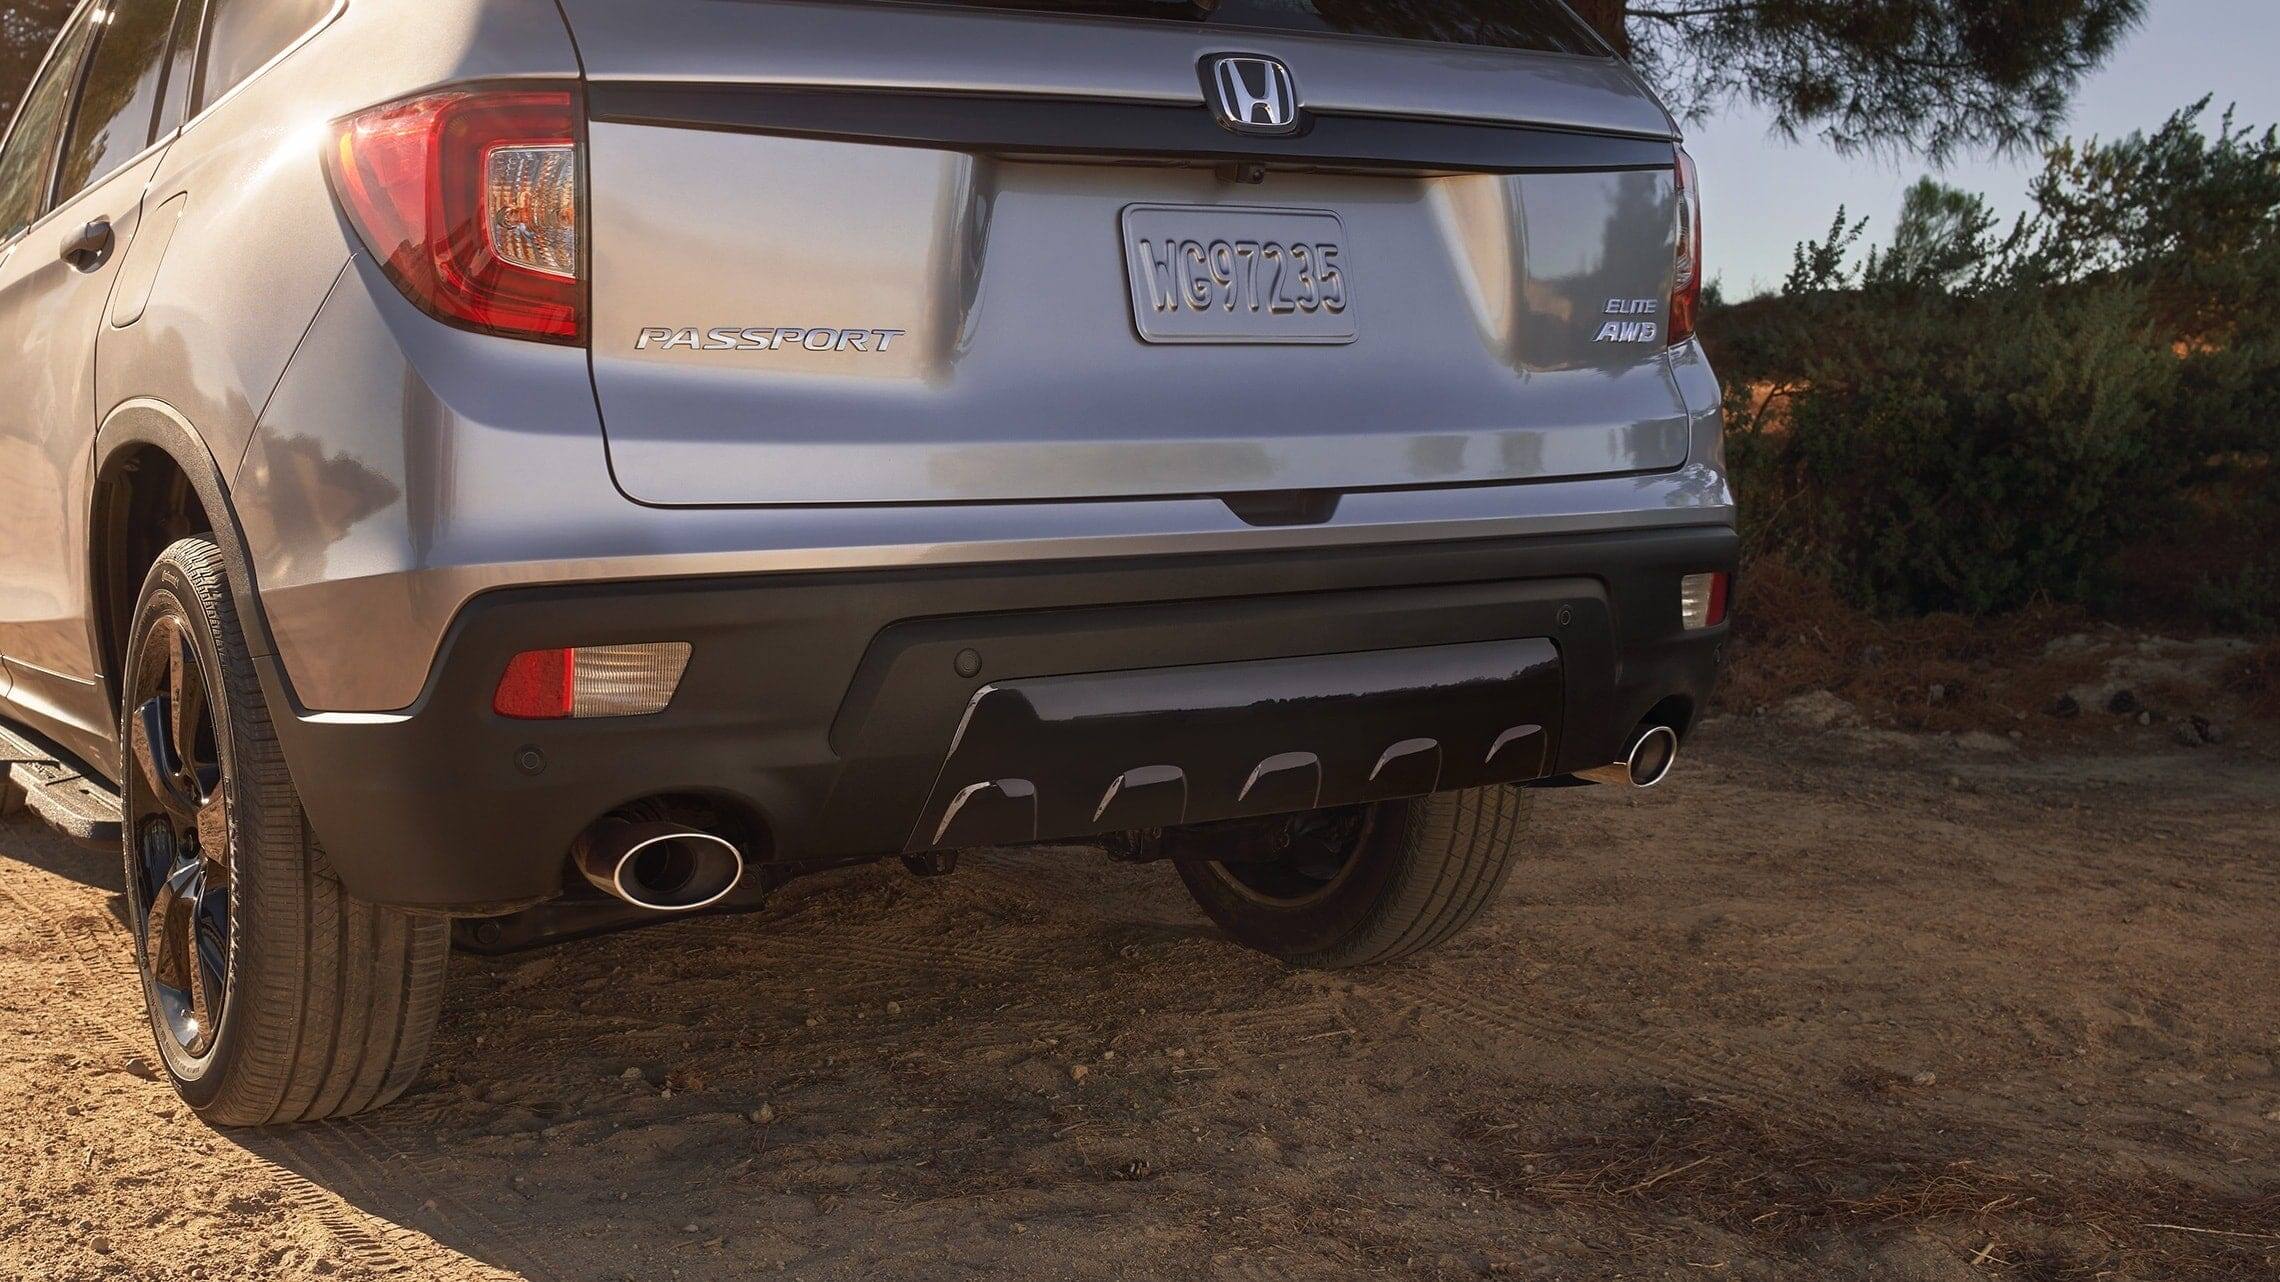 Dual exhaust finishers with parking sensors on the 2019 Honda Passport Elite in Lunar Silver Metallic.